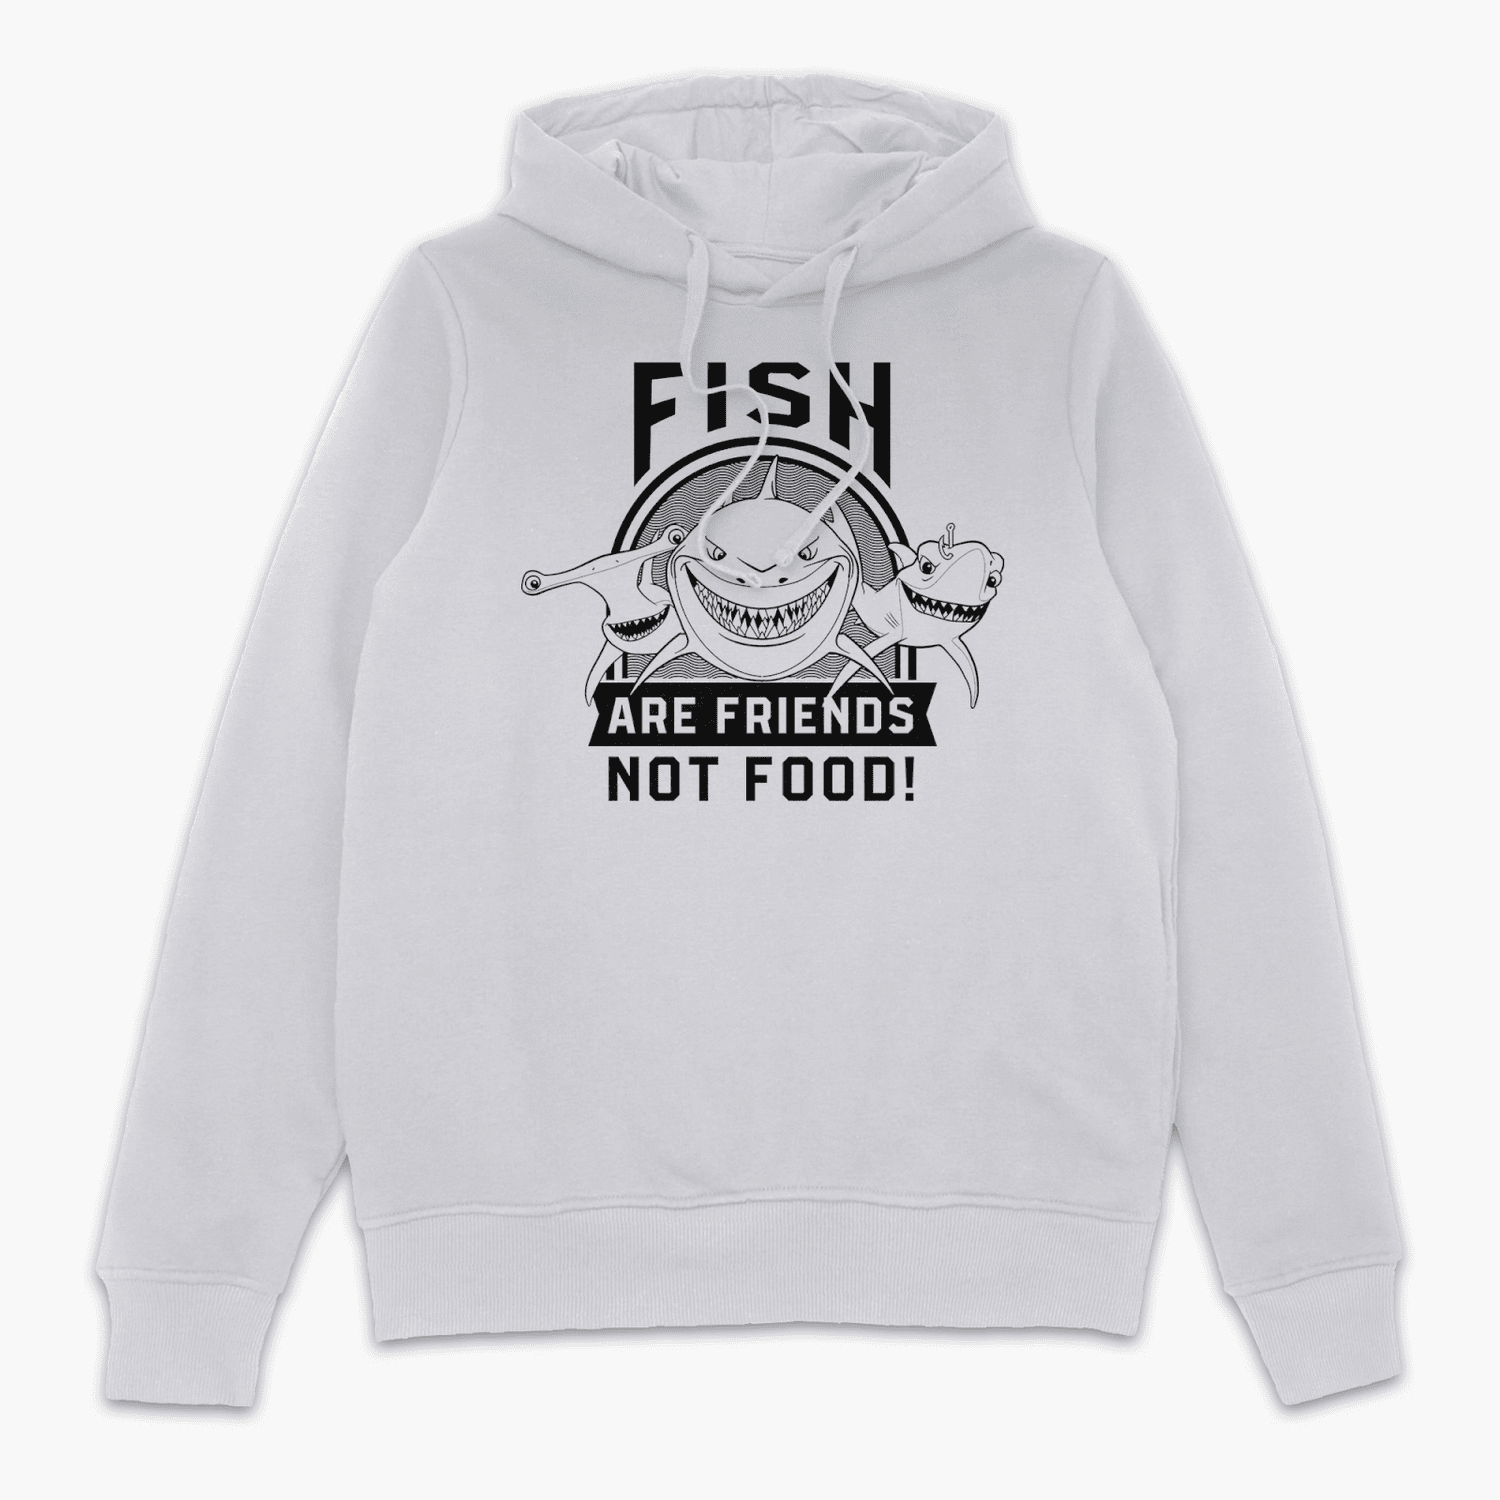 Finding Nemo Fish Are Friends Hoodie - White